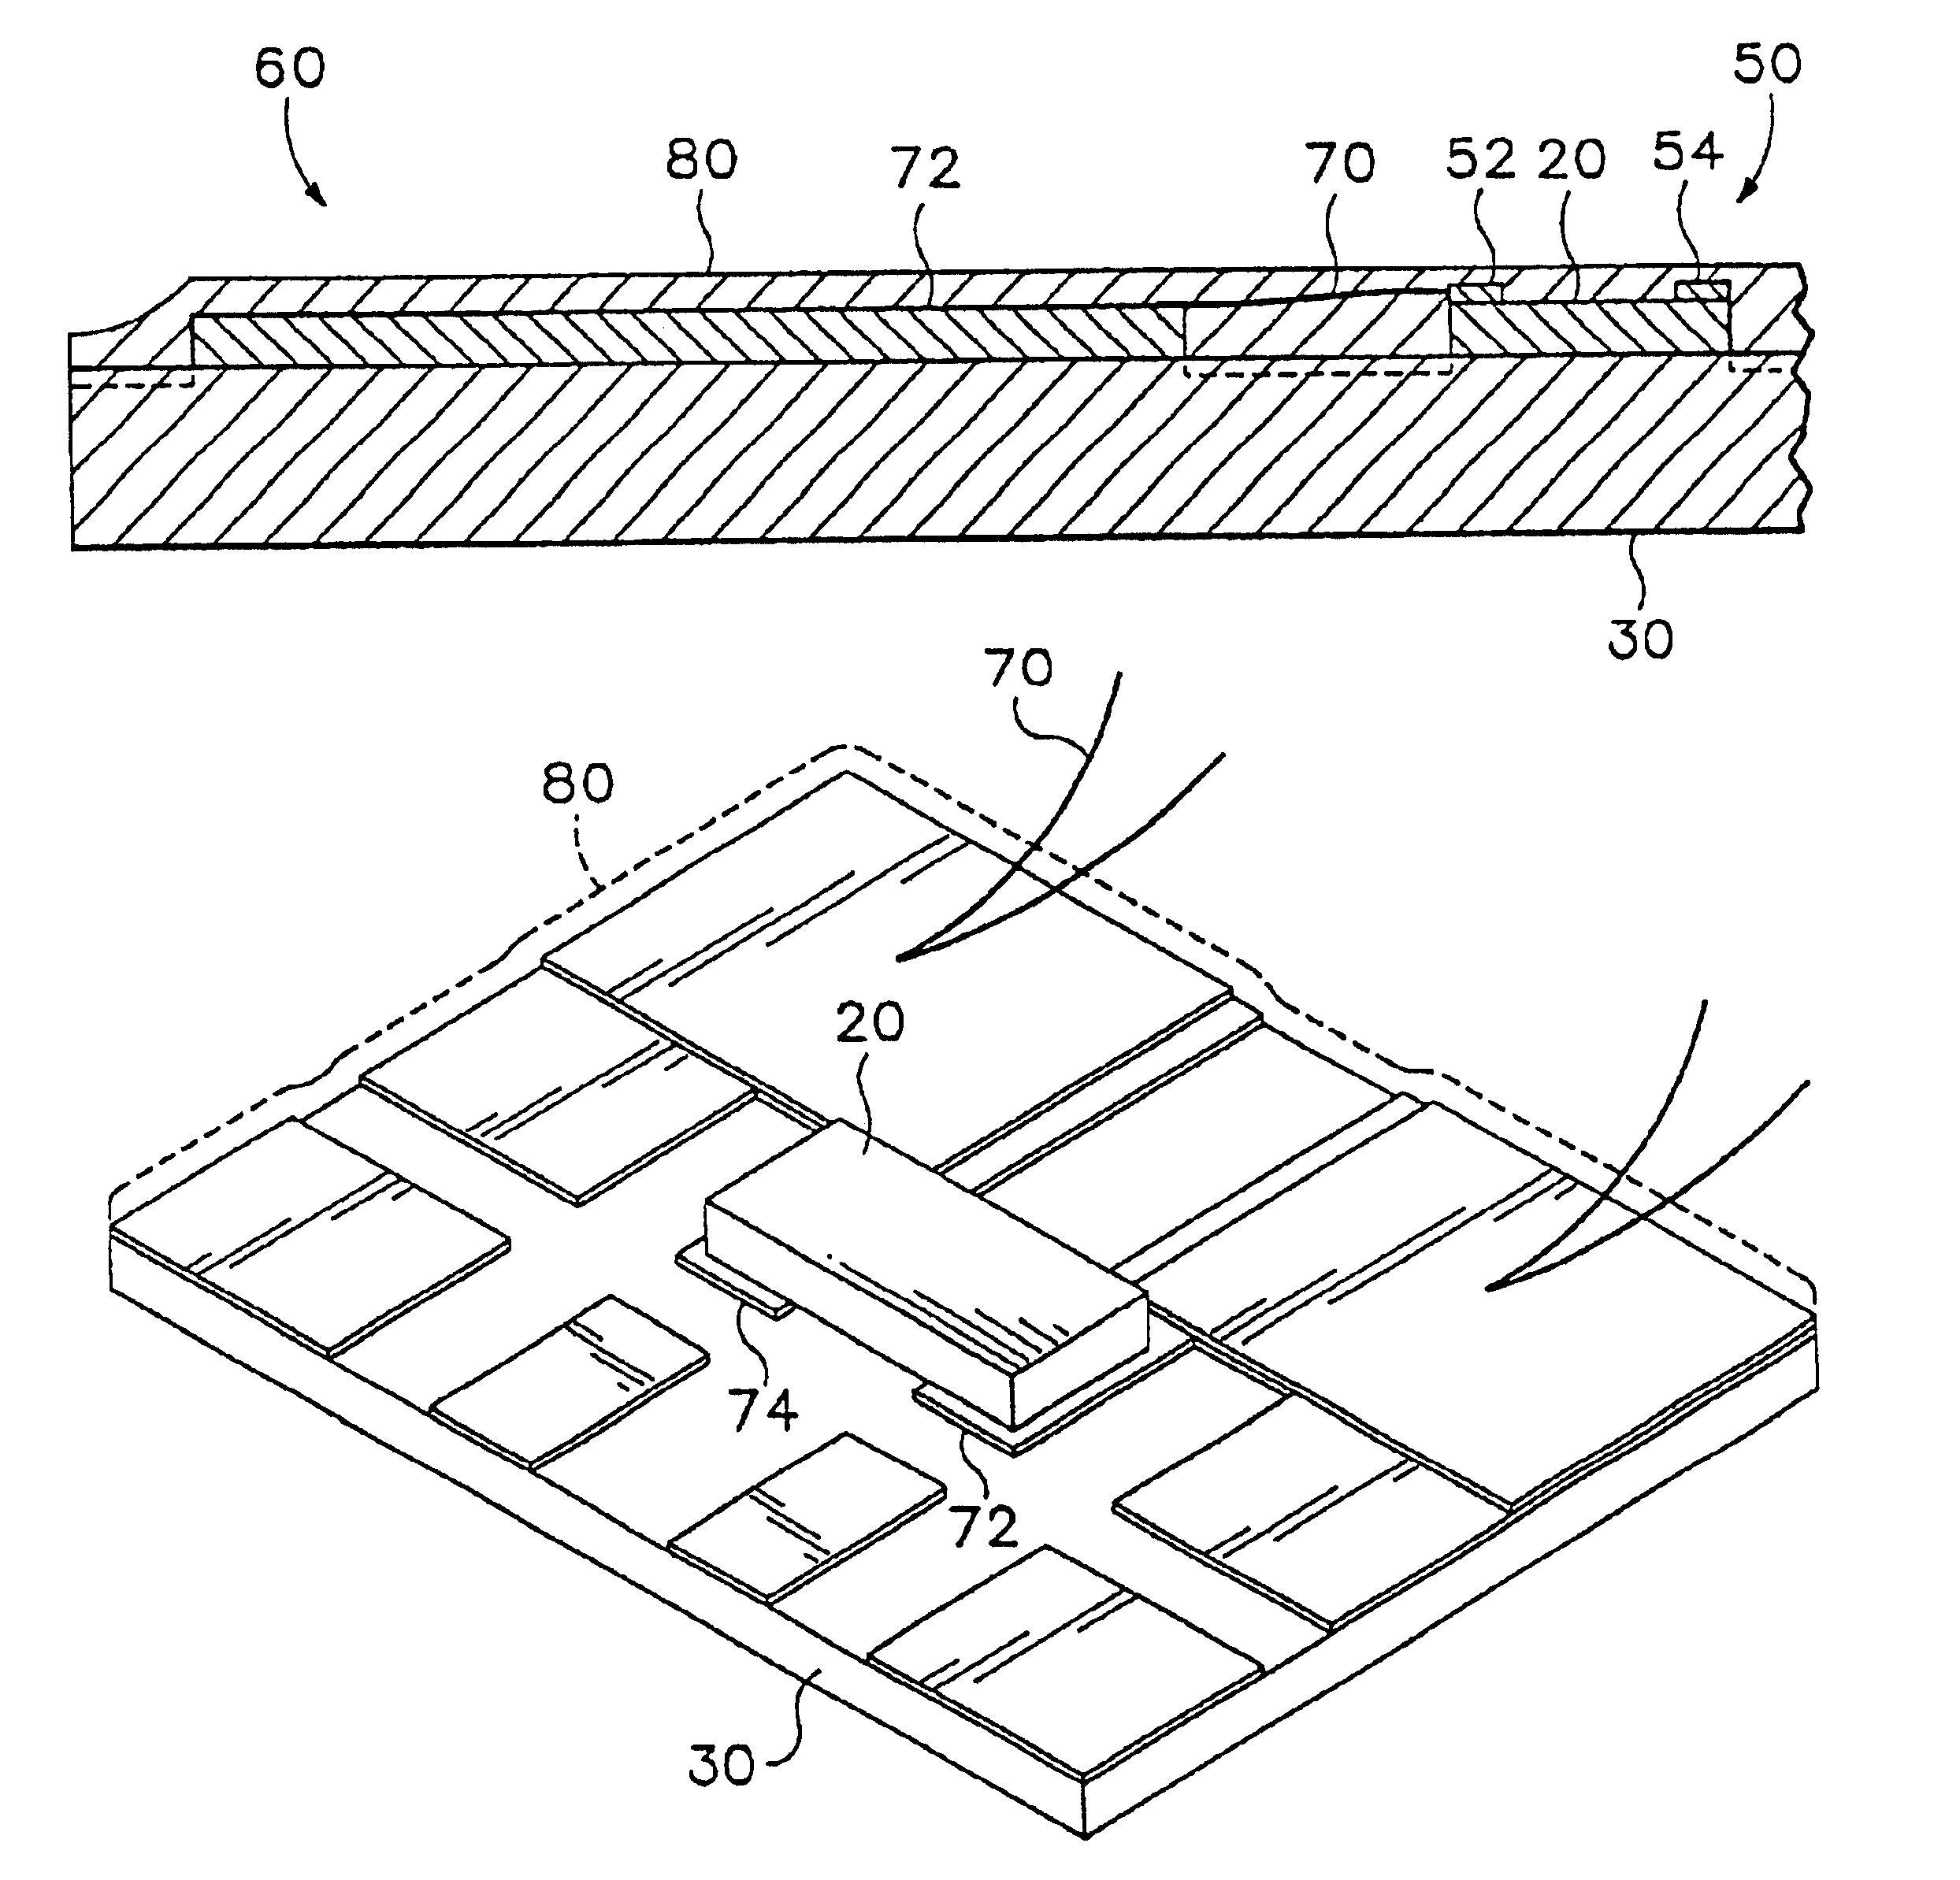 Adhesion and/or encapsulation of silicon carbide-based semiconductor devices on ceramic substrates